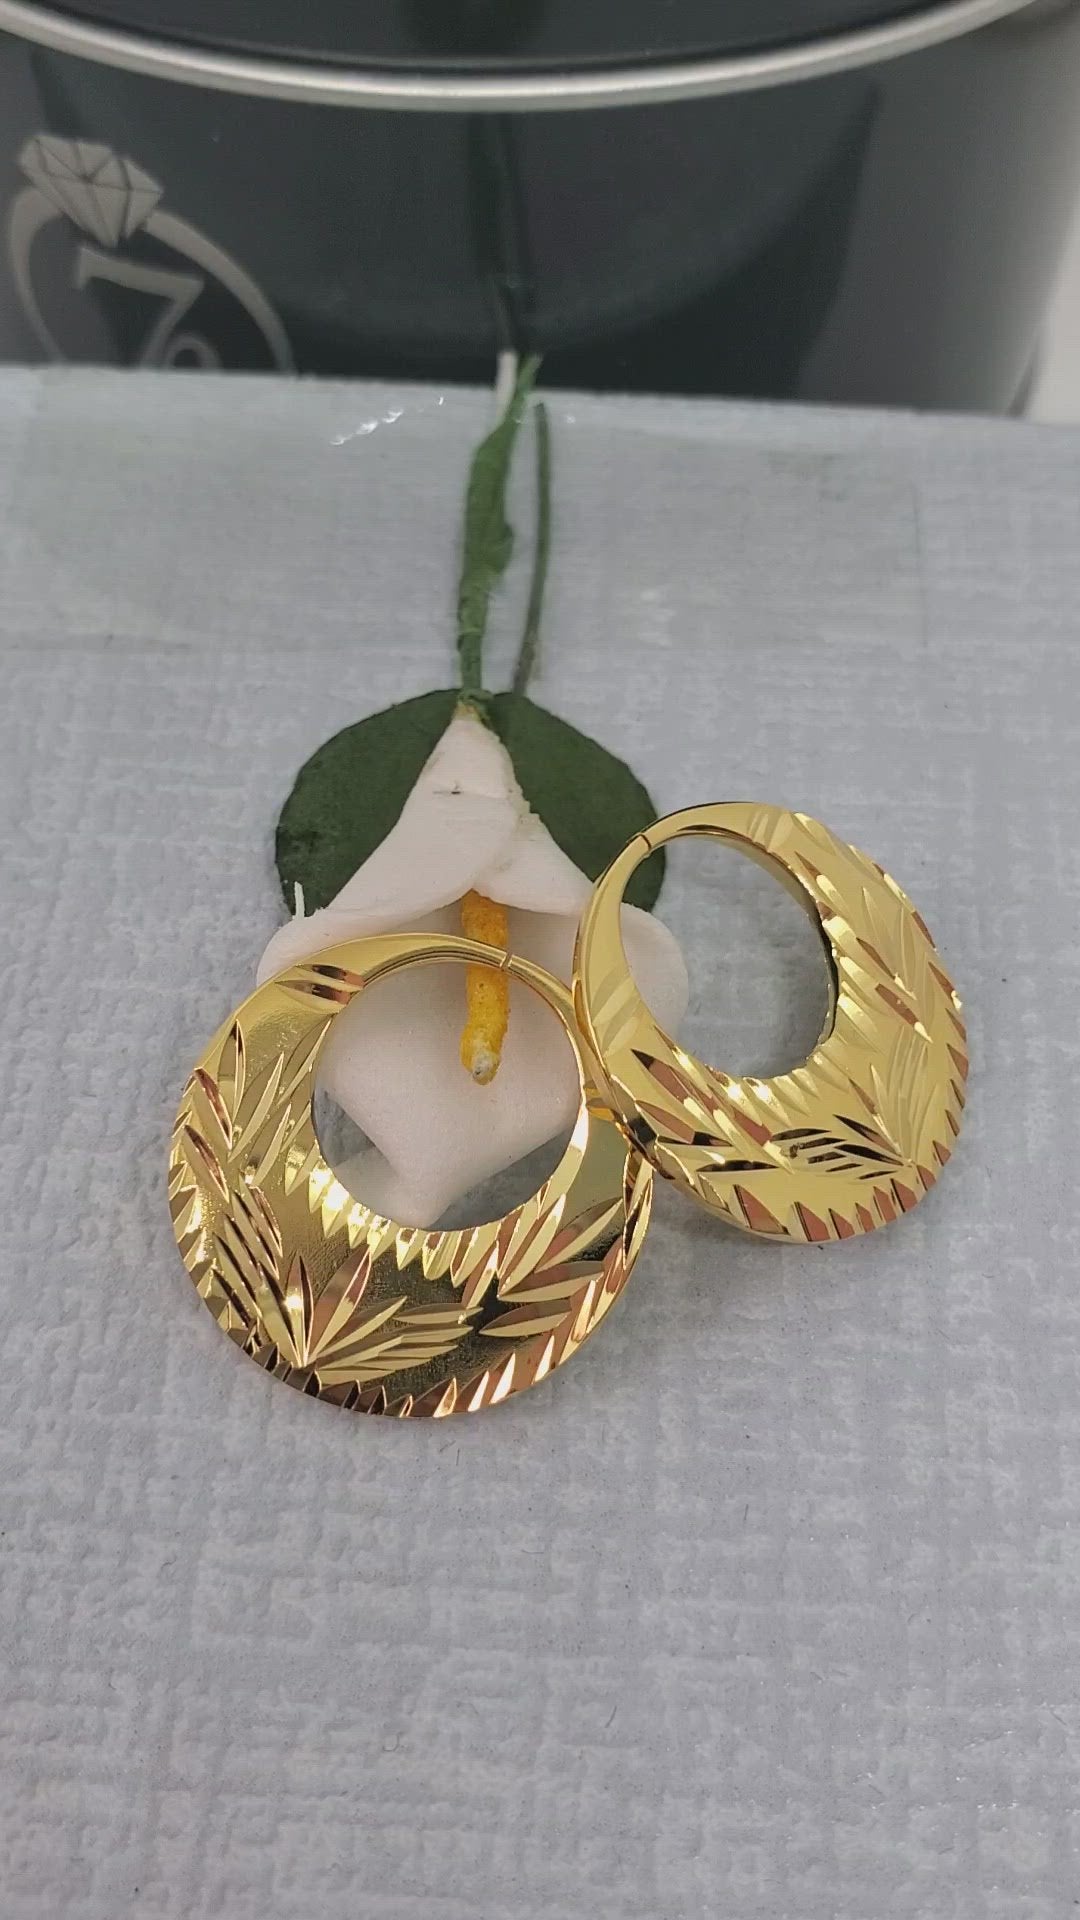 Buy quality 20k Gold Exclusive Fish Design Earring in Ahmedabad